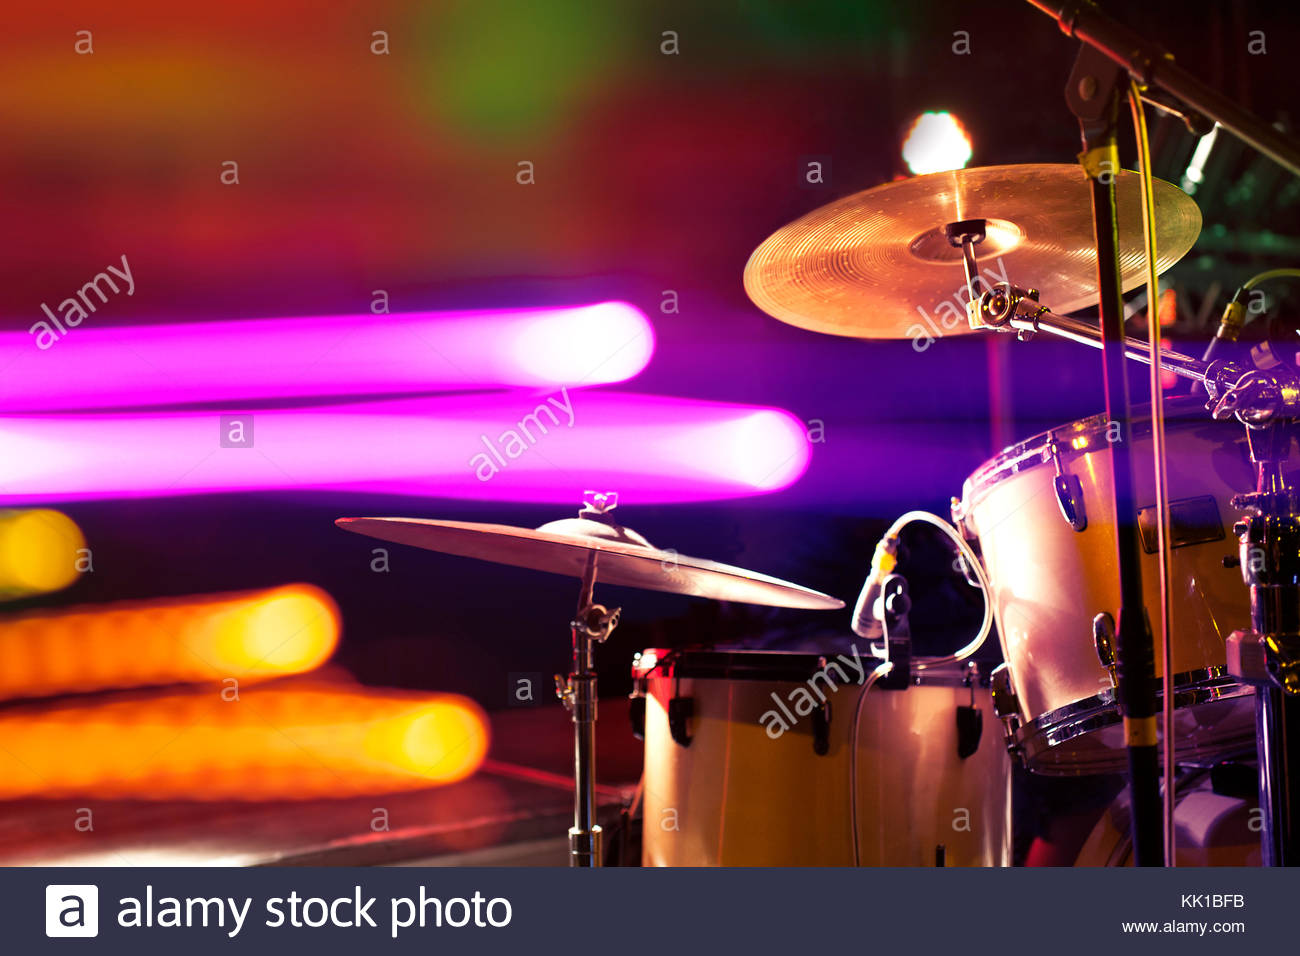 Live Music Background Drum On Stage And Concert Lights Stock Photo